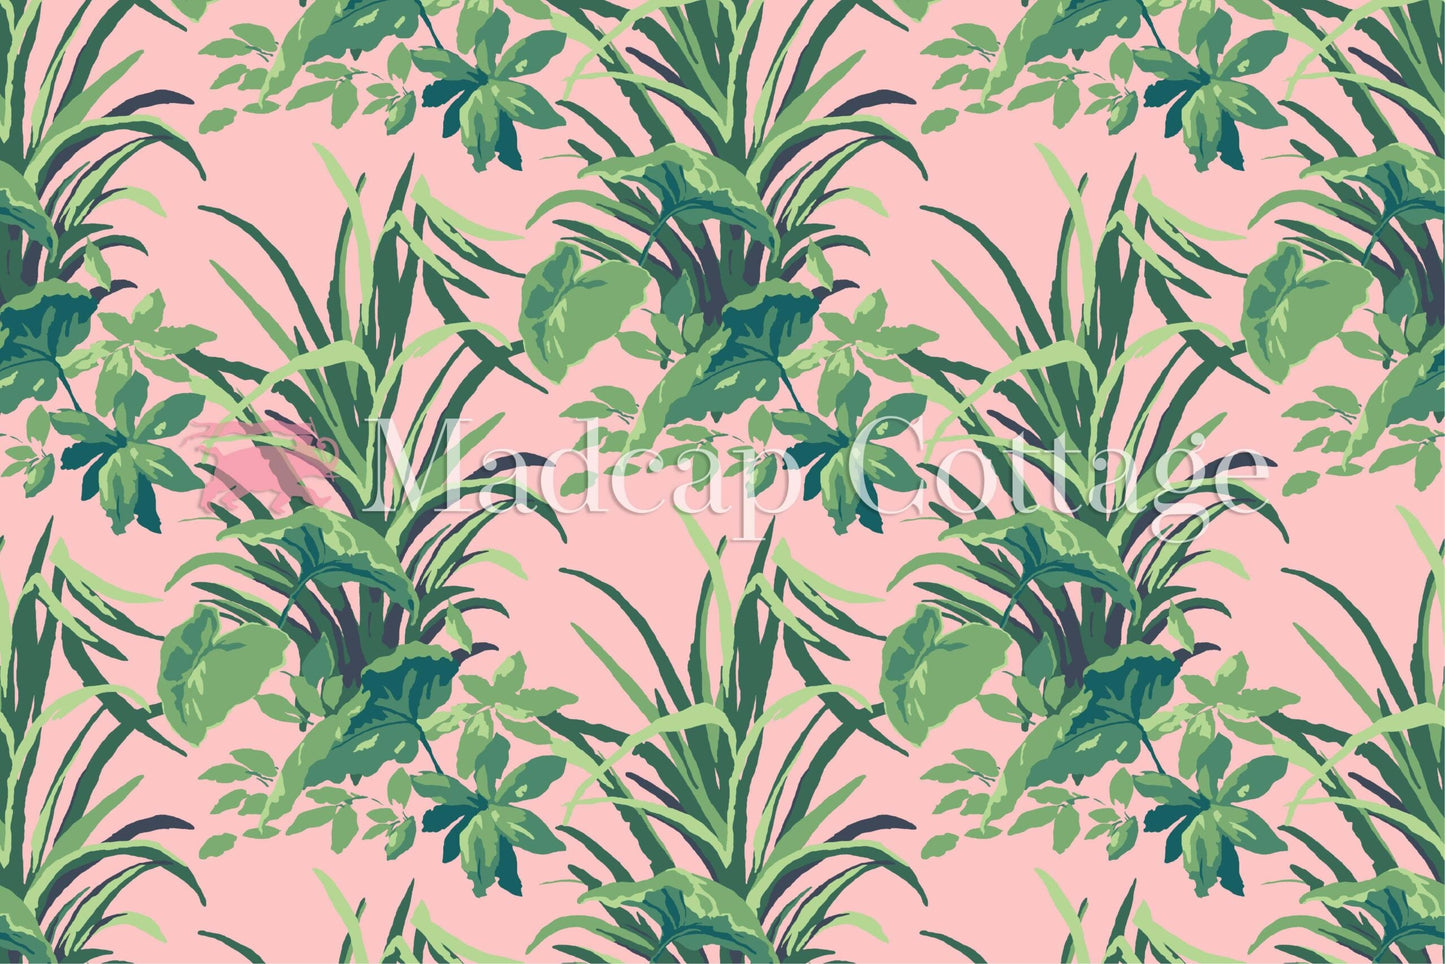 Jungle Road Bahama Pink Outdoor Fabric by the Yard